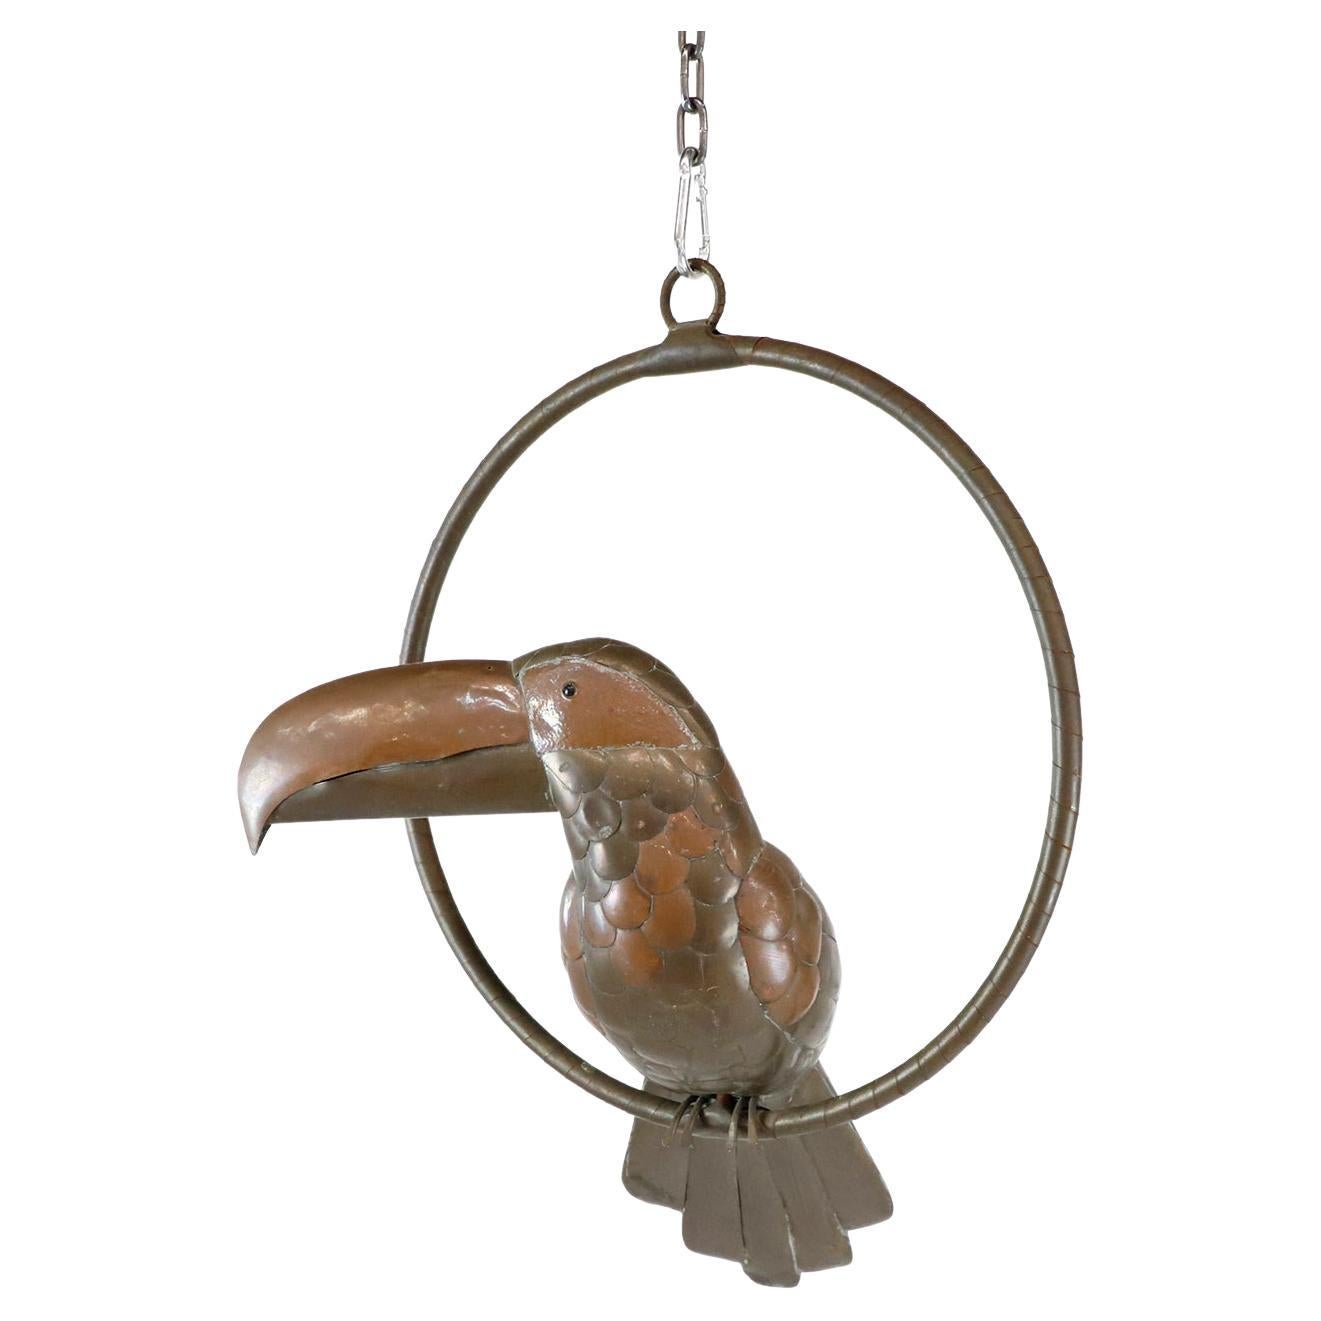 Sergio Bustamante Sculpture of Toucan on Hanging Perch For Sale